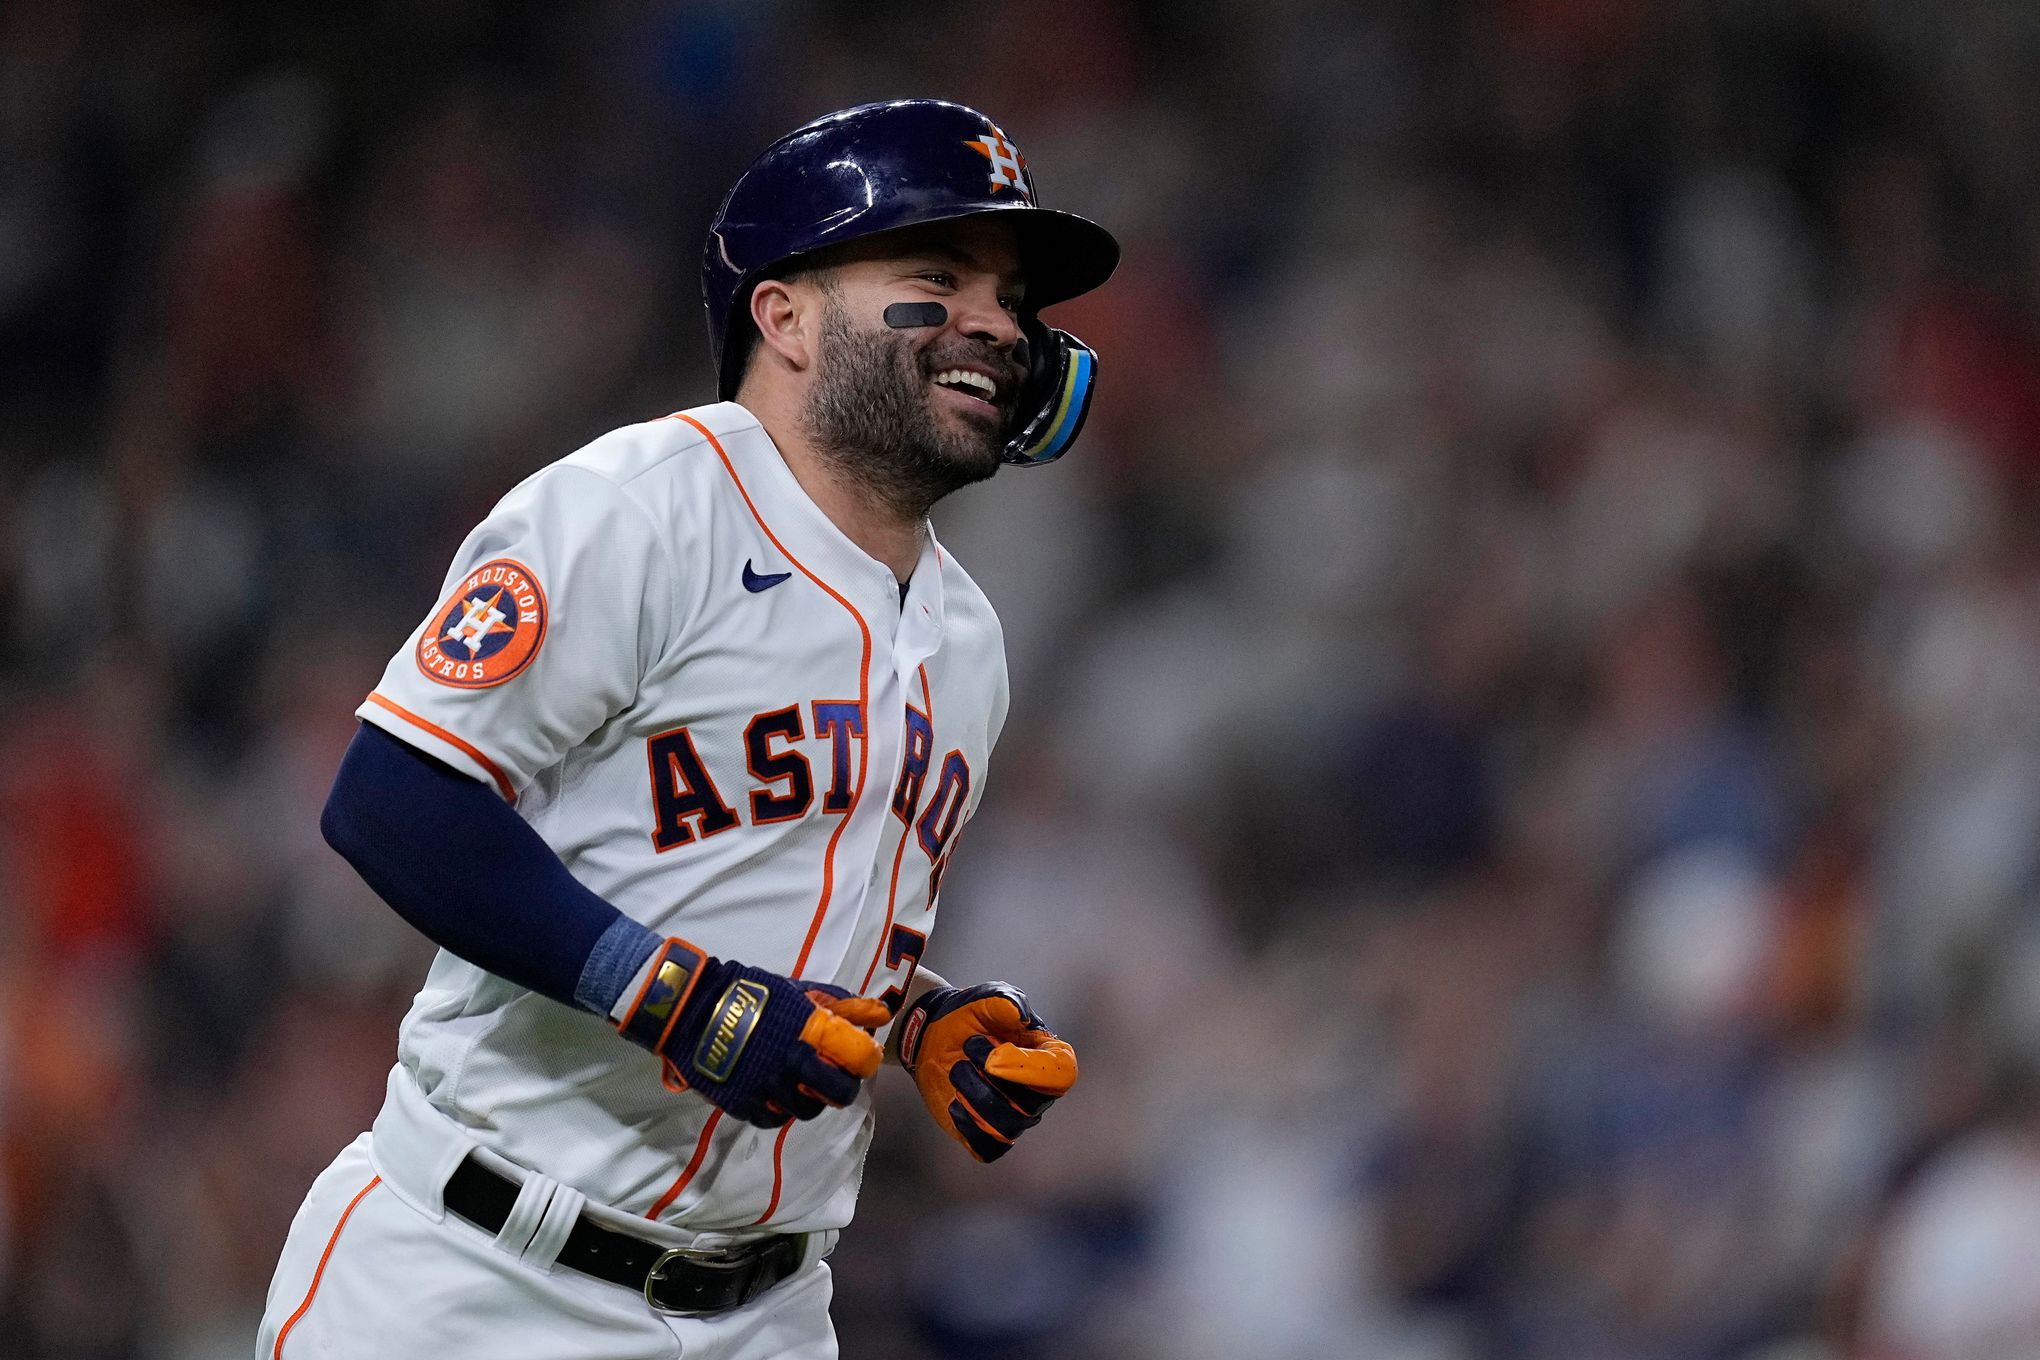 If the Astros have been overlooked this season, the return of Alvarez and  Altuve could change that